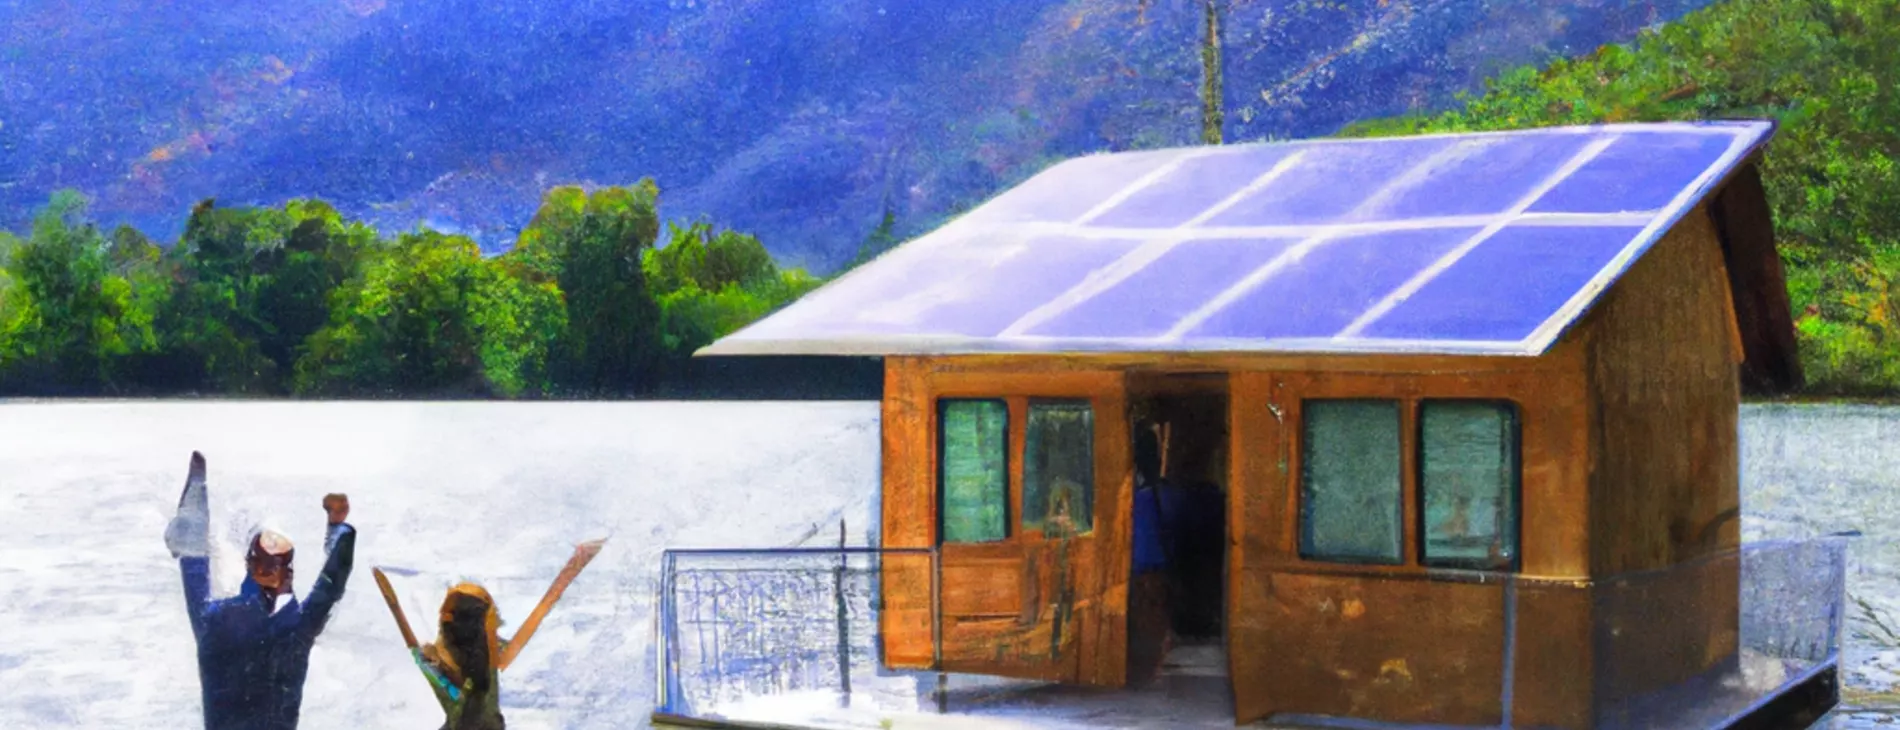 Off-grid cabine with solar panels, small wind generator, locate on a lake with mountain in the background. 2 people standing in the front before the house waving, monet style